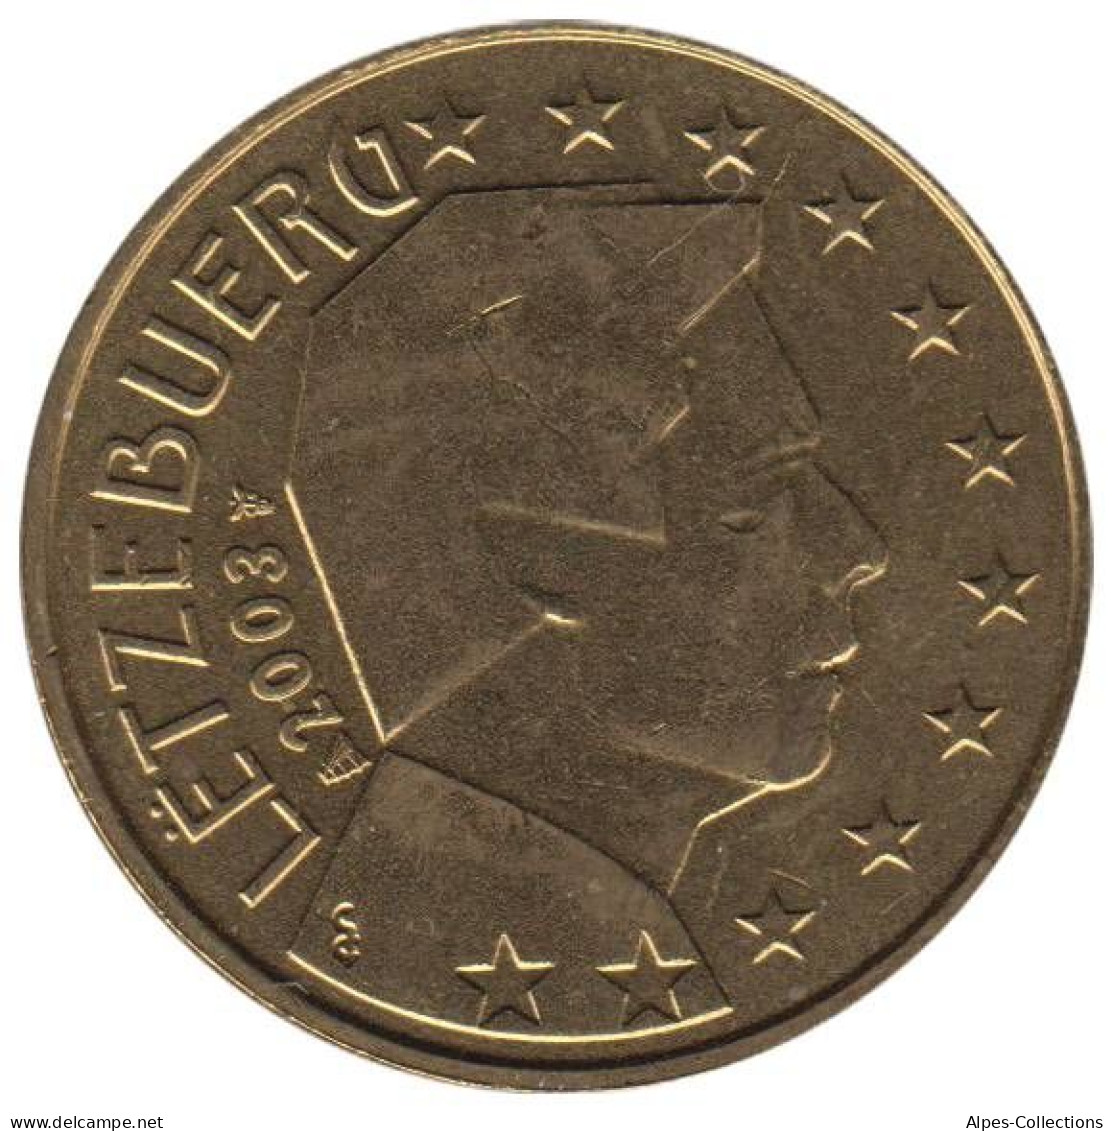 LU05003.1 - LUXEMBOURG - 50 Cents - 2003 - Luxembourg